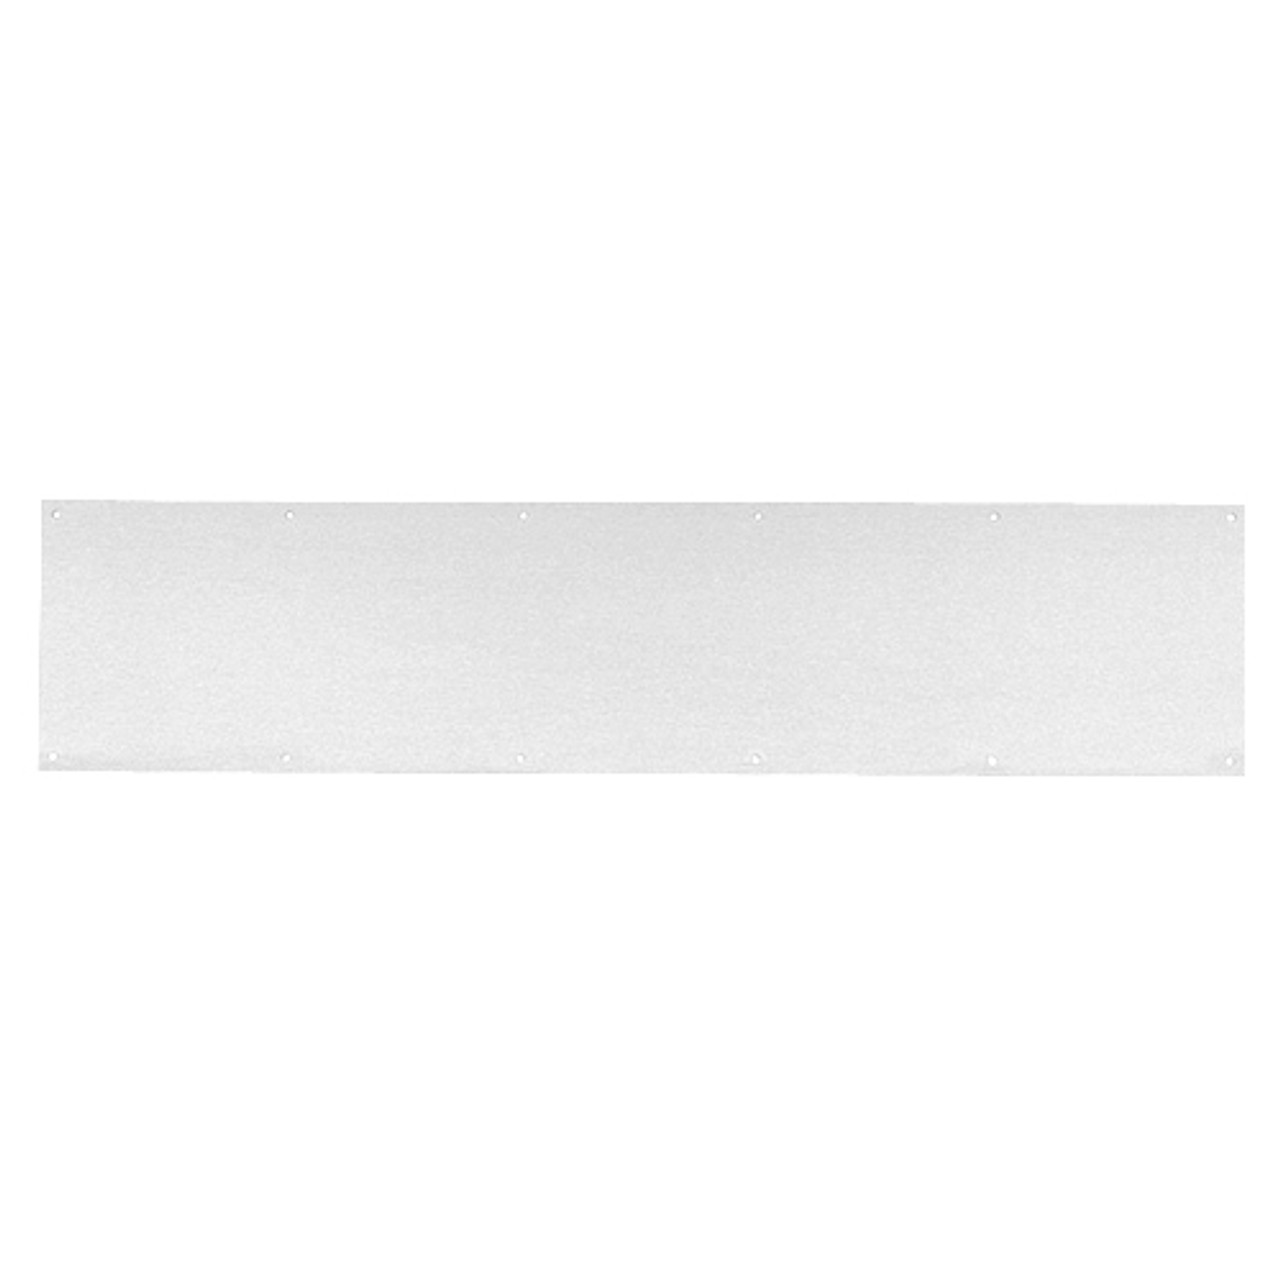 8400-US28-12x48-B-CS Ives 8400 Series Protection Plate in Aluminum